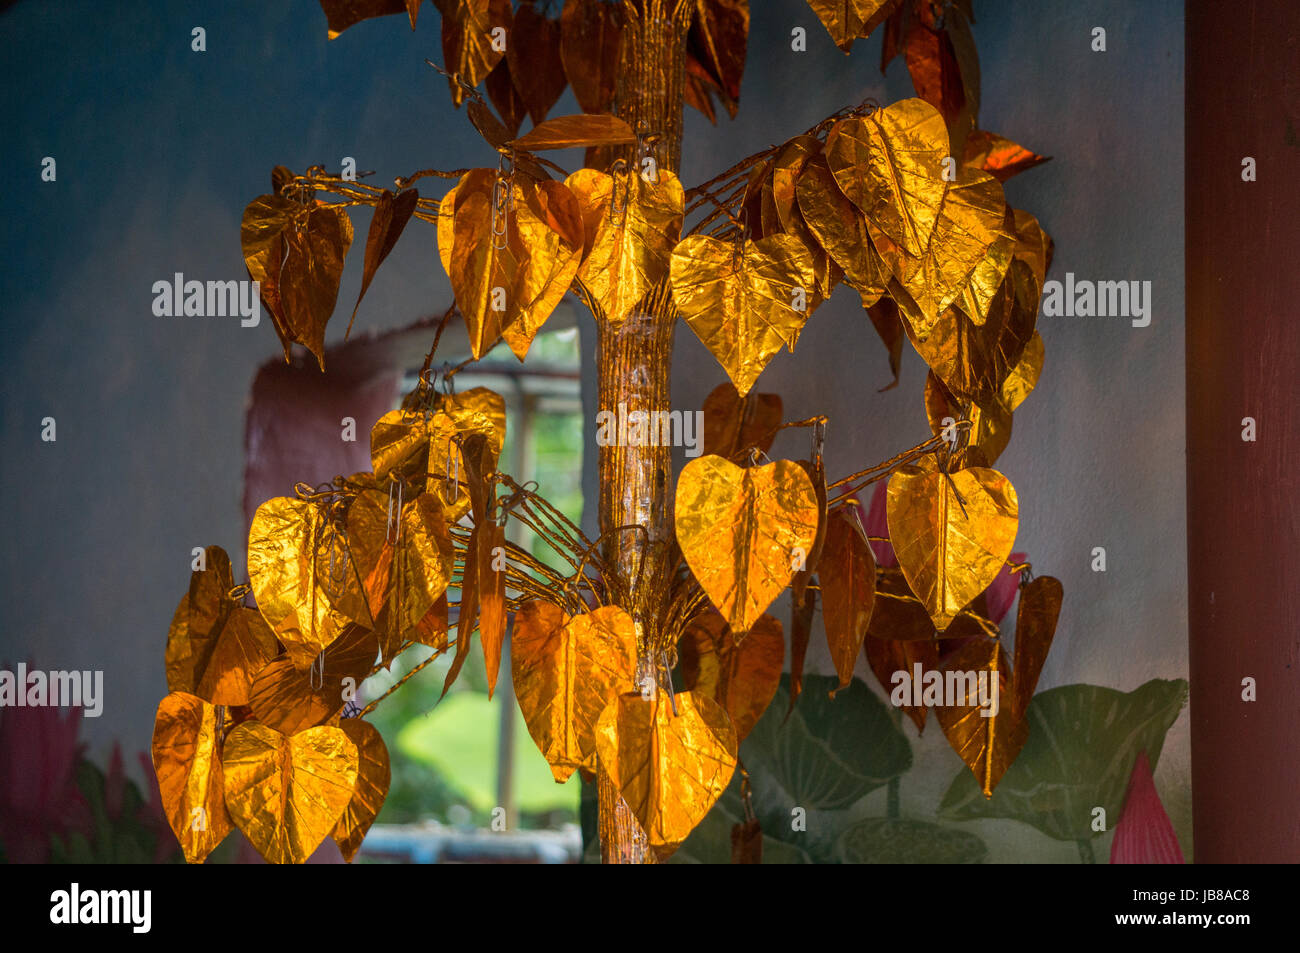 Tree with golden leaves at chinese temple Stock Photo